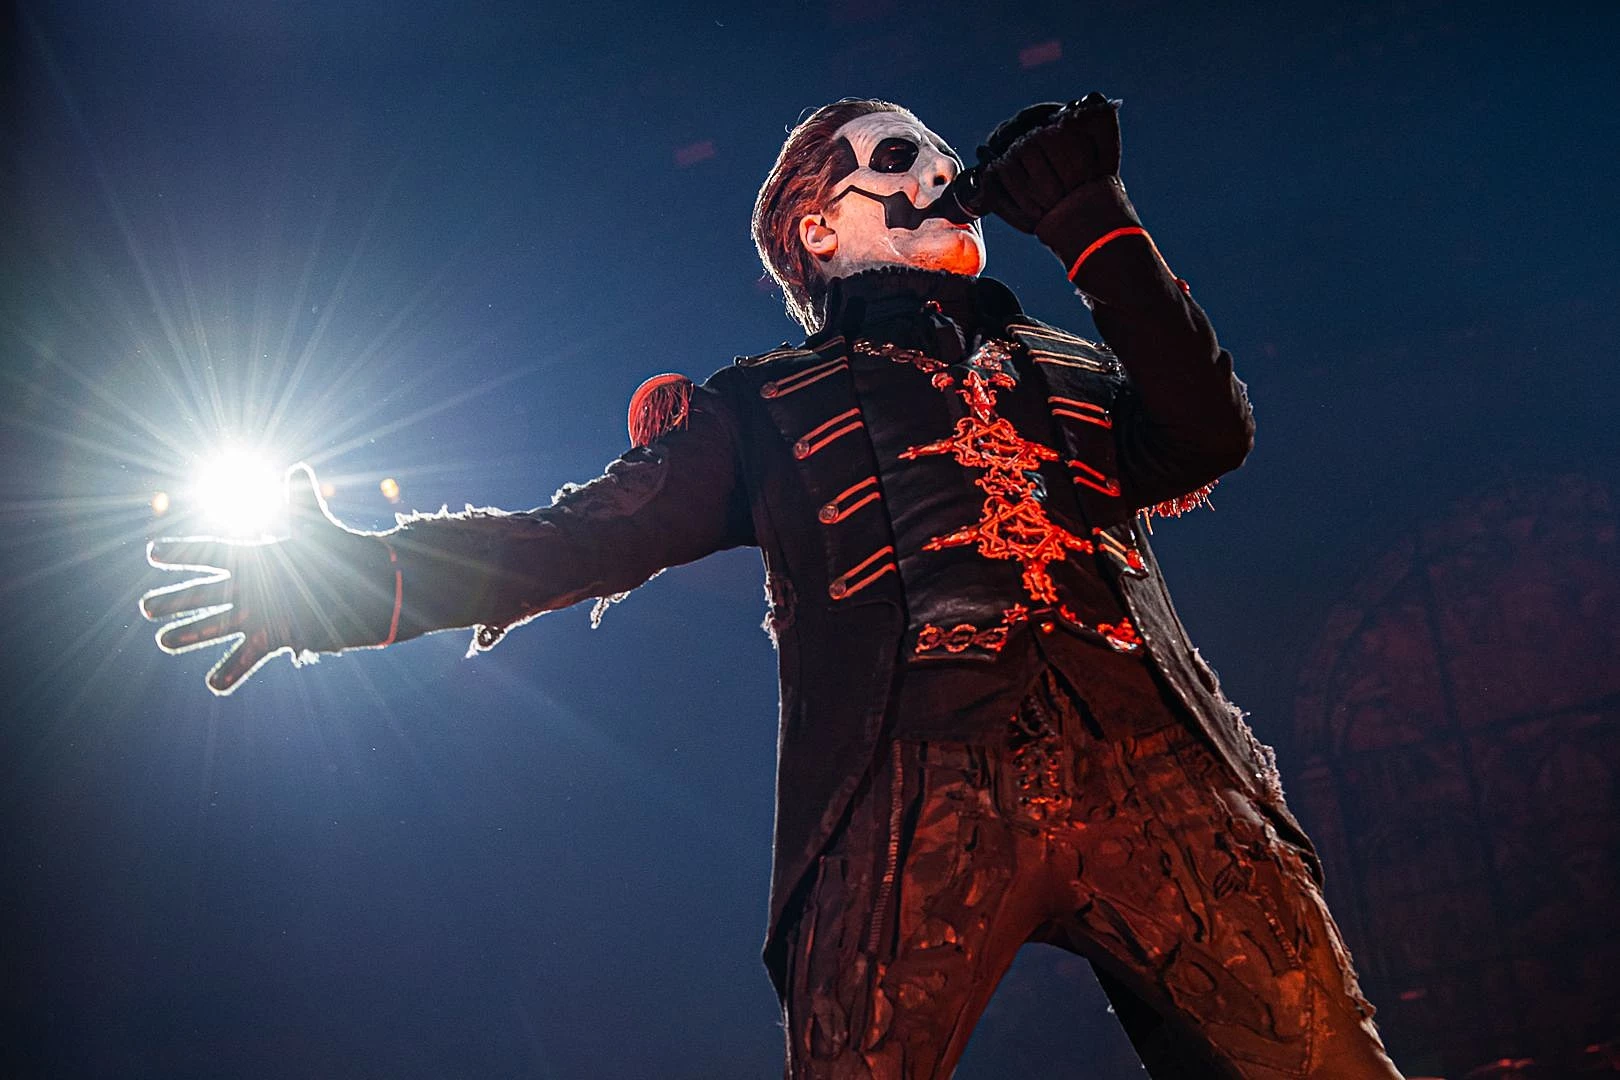 Swedish rockers Ghost announce tour, Milwaukee stop, with Amon Amarth